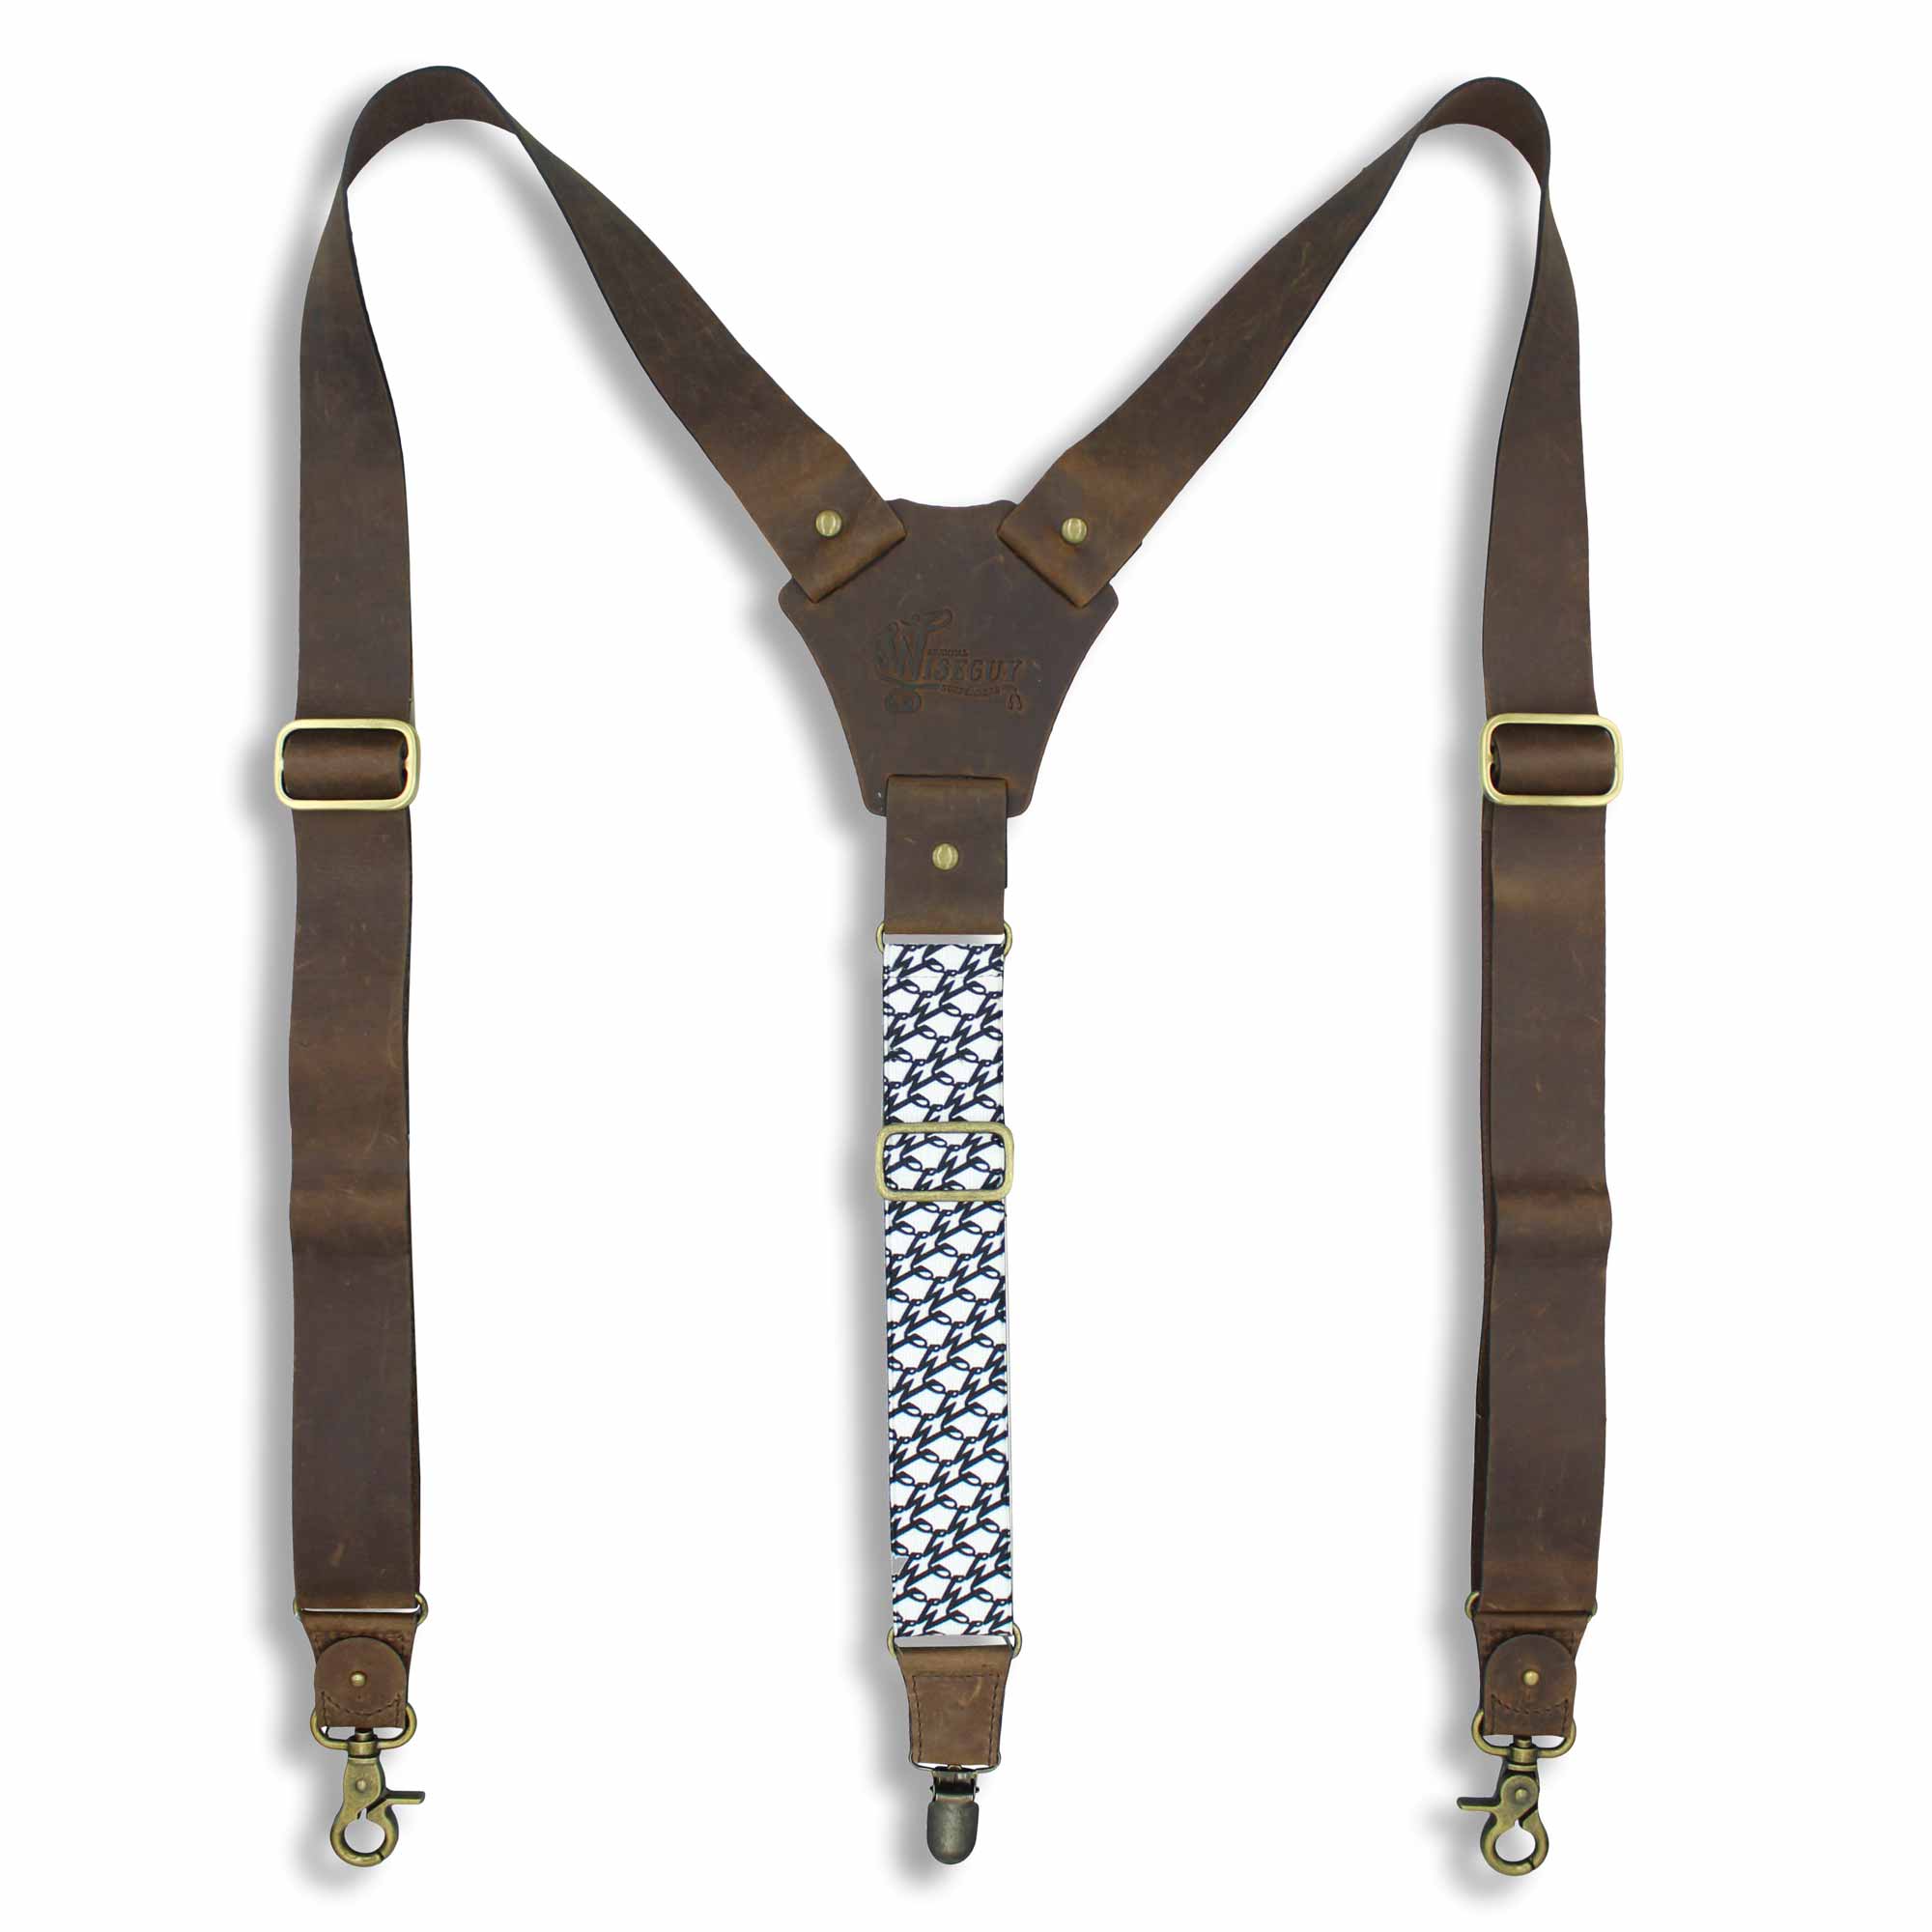 Billy the Kid Flex Brown Leather Suspenders with Elastic W Back Strap - Wiseguy Suspenders